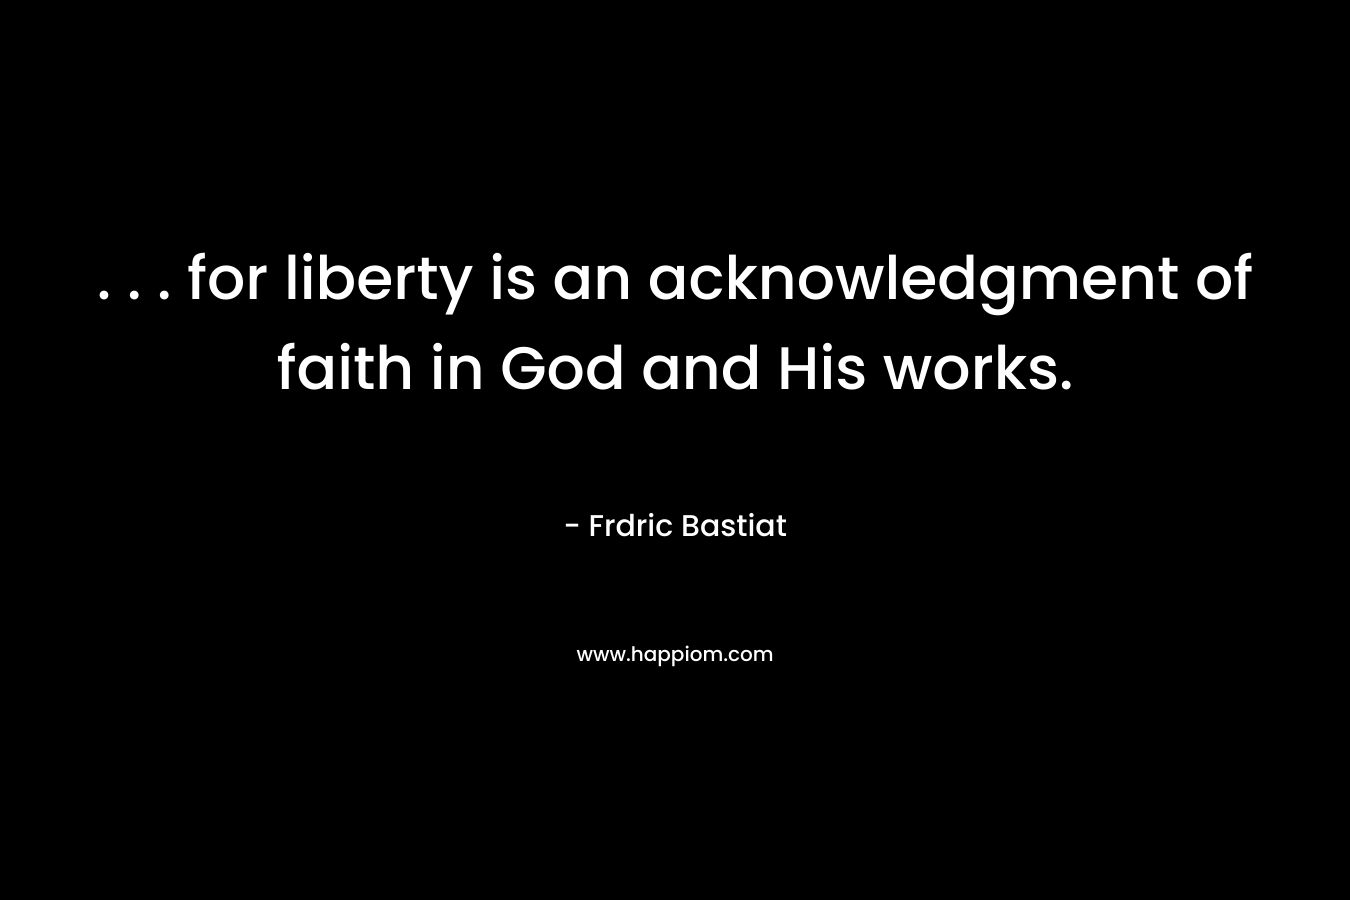 . . . for liberty is an acknowledgment of faith in God and His works.